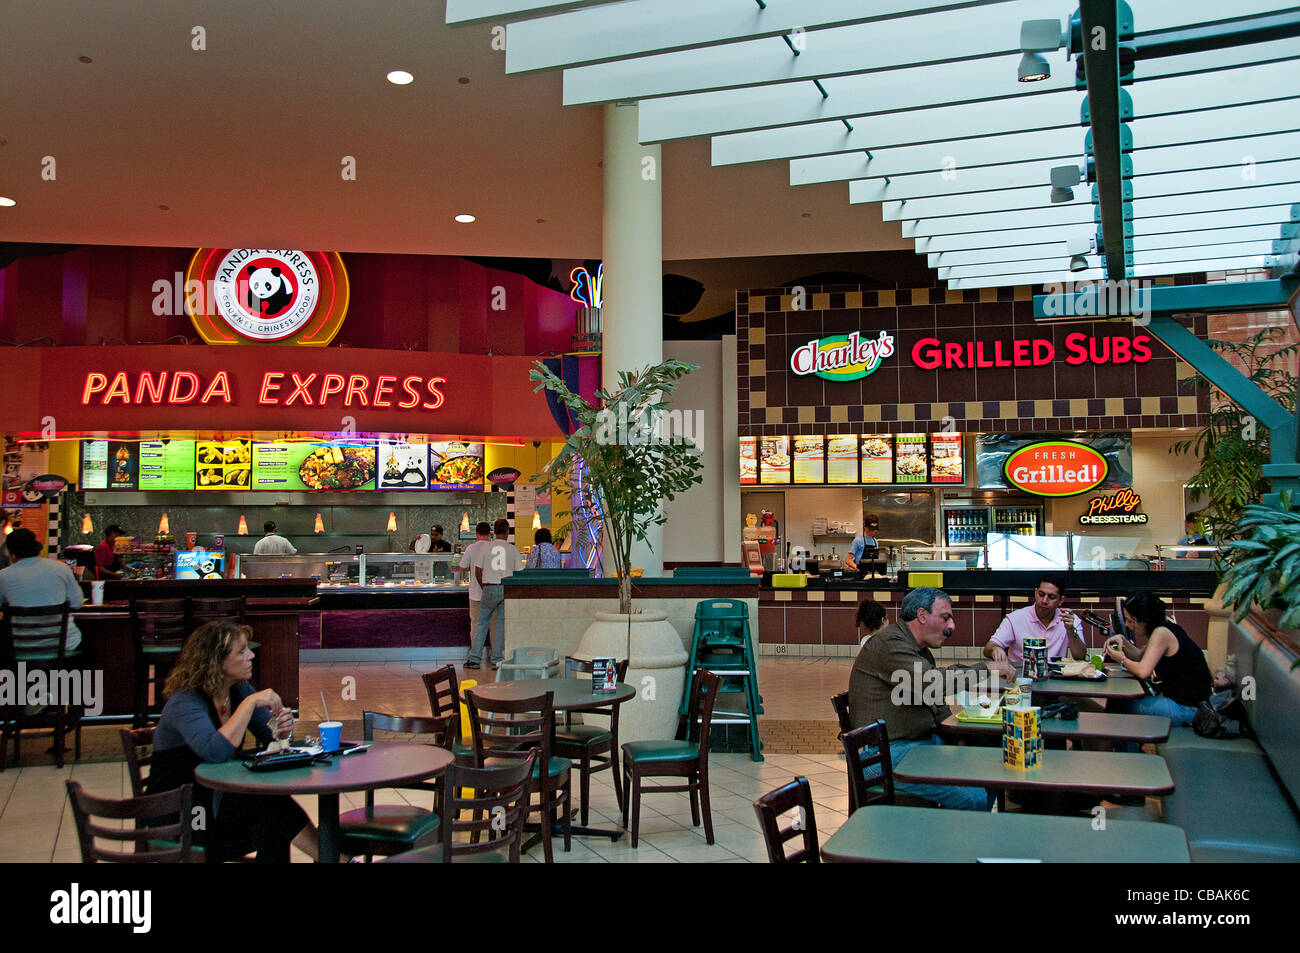 Panda Express Grilled Subs Fast Food Shopping Mall Food Court United States Stock Photo